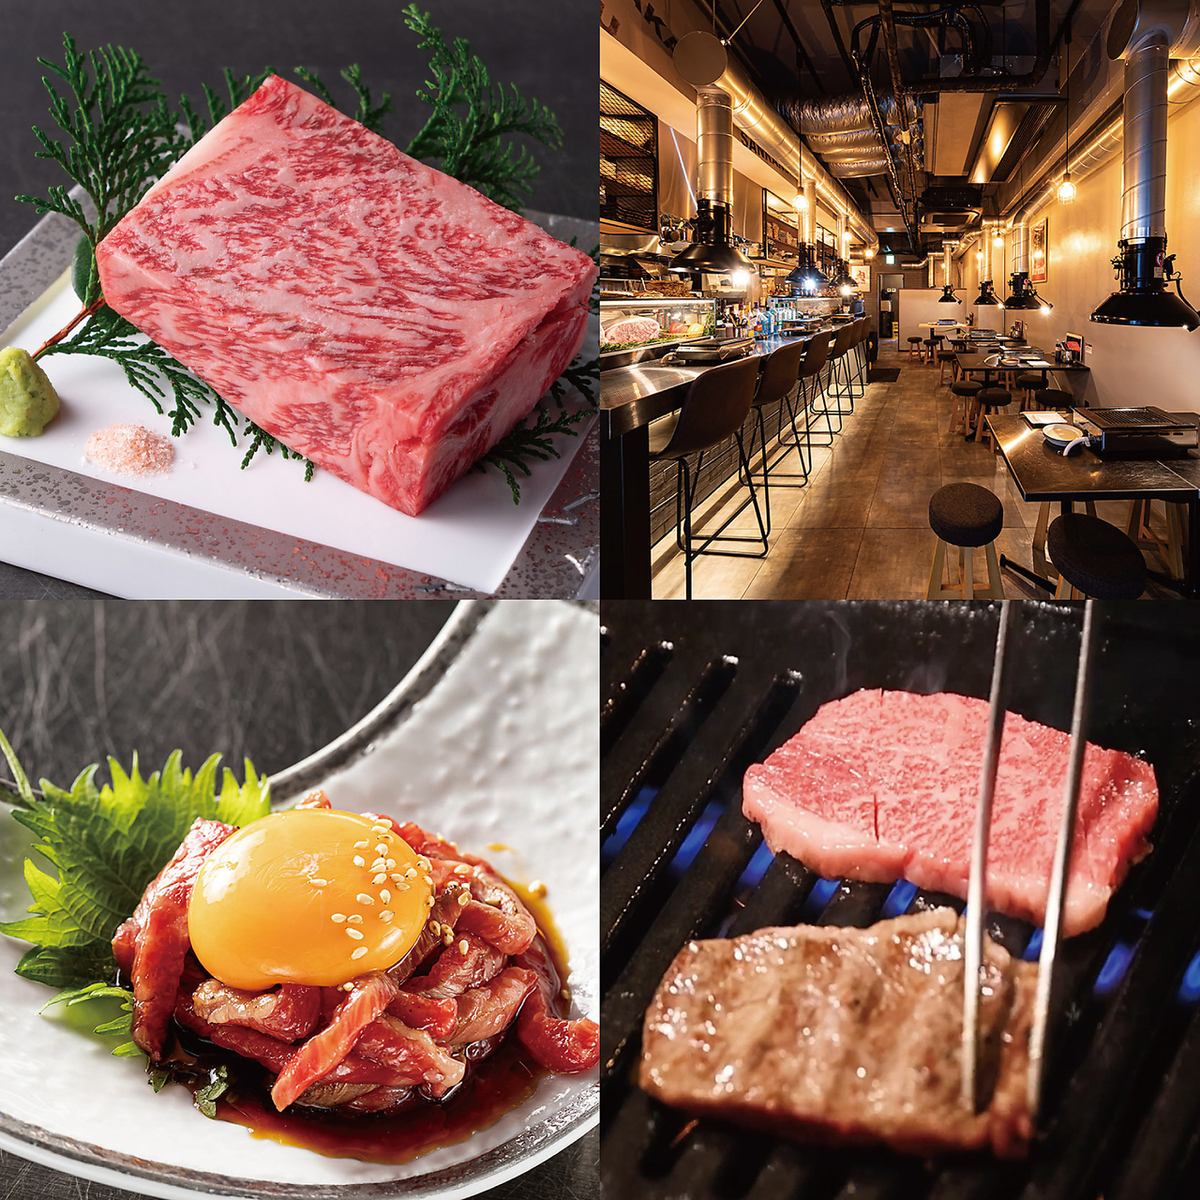 You can enjoy the finest yakiniku and carefully selected alcoholic beverages at reasonable prices in a warm and stylish interior.